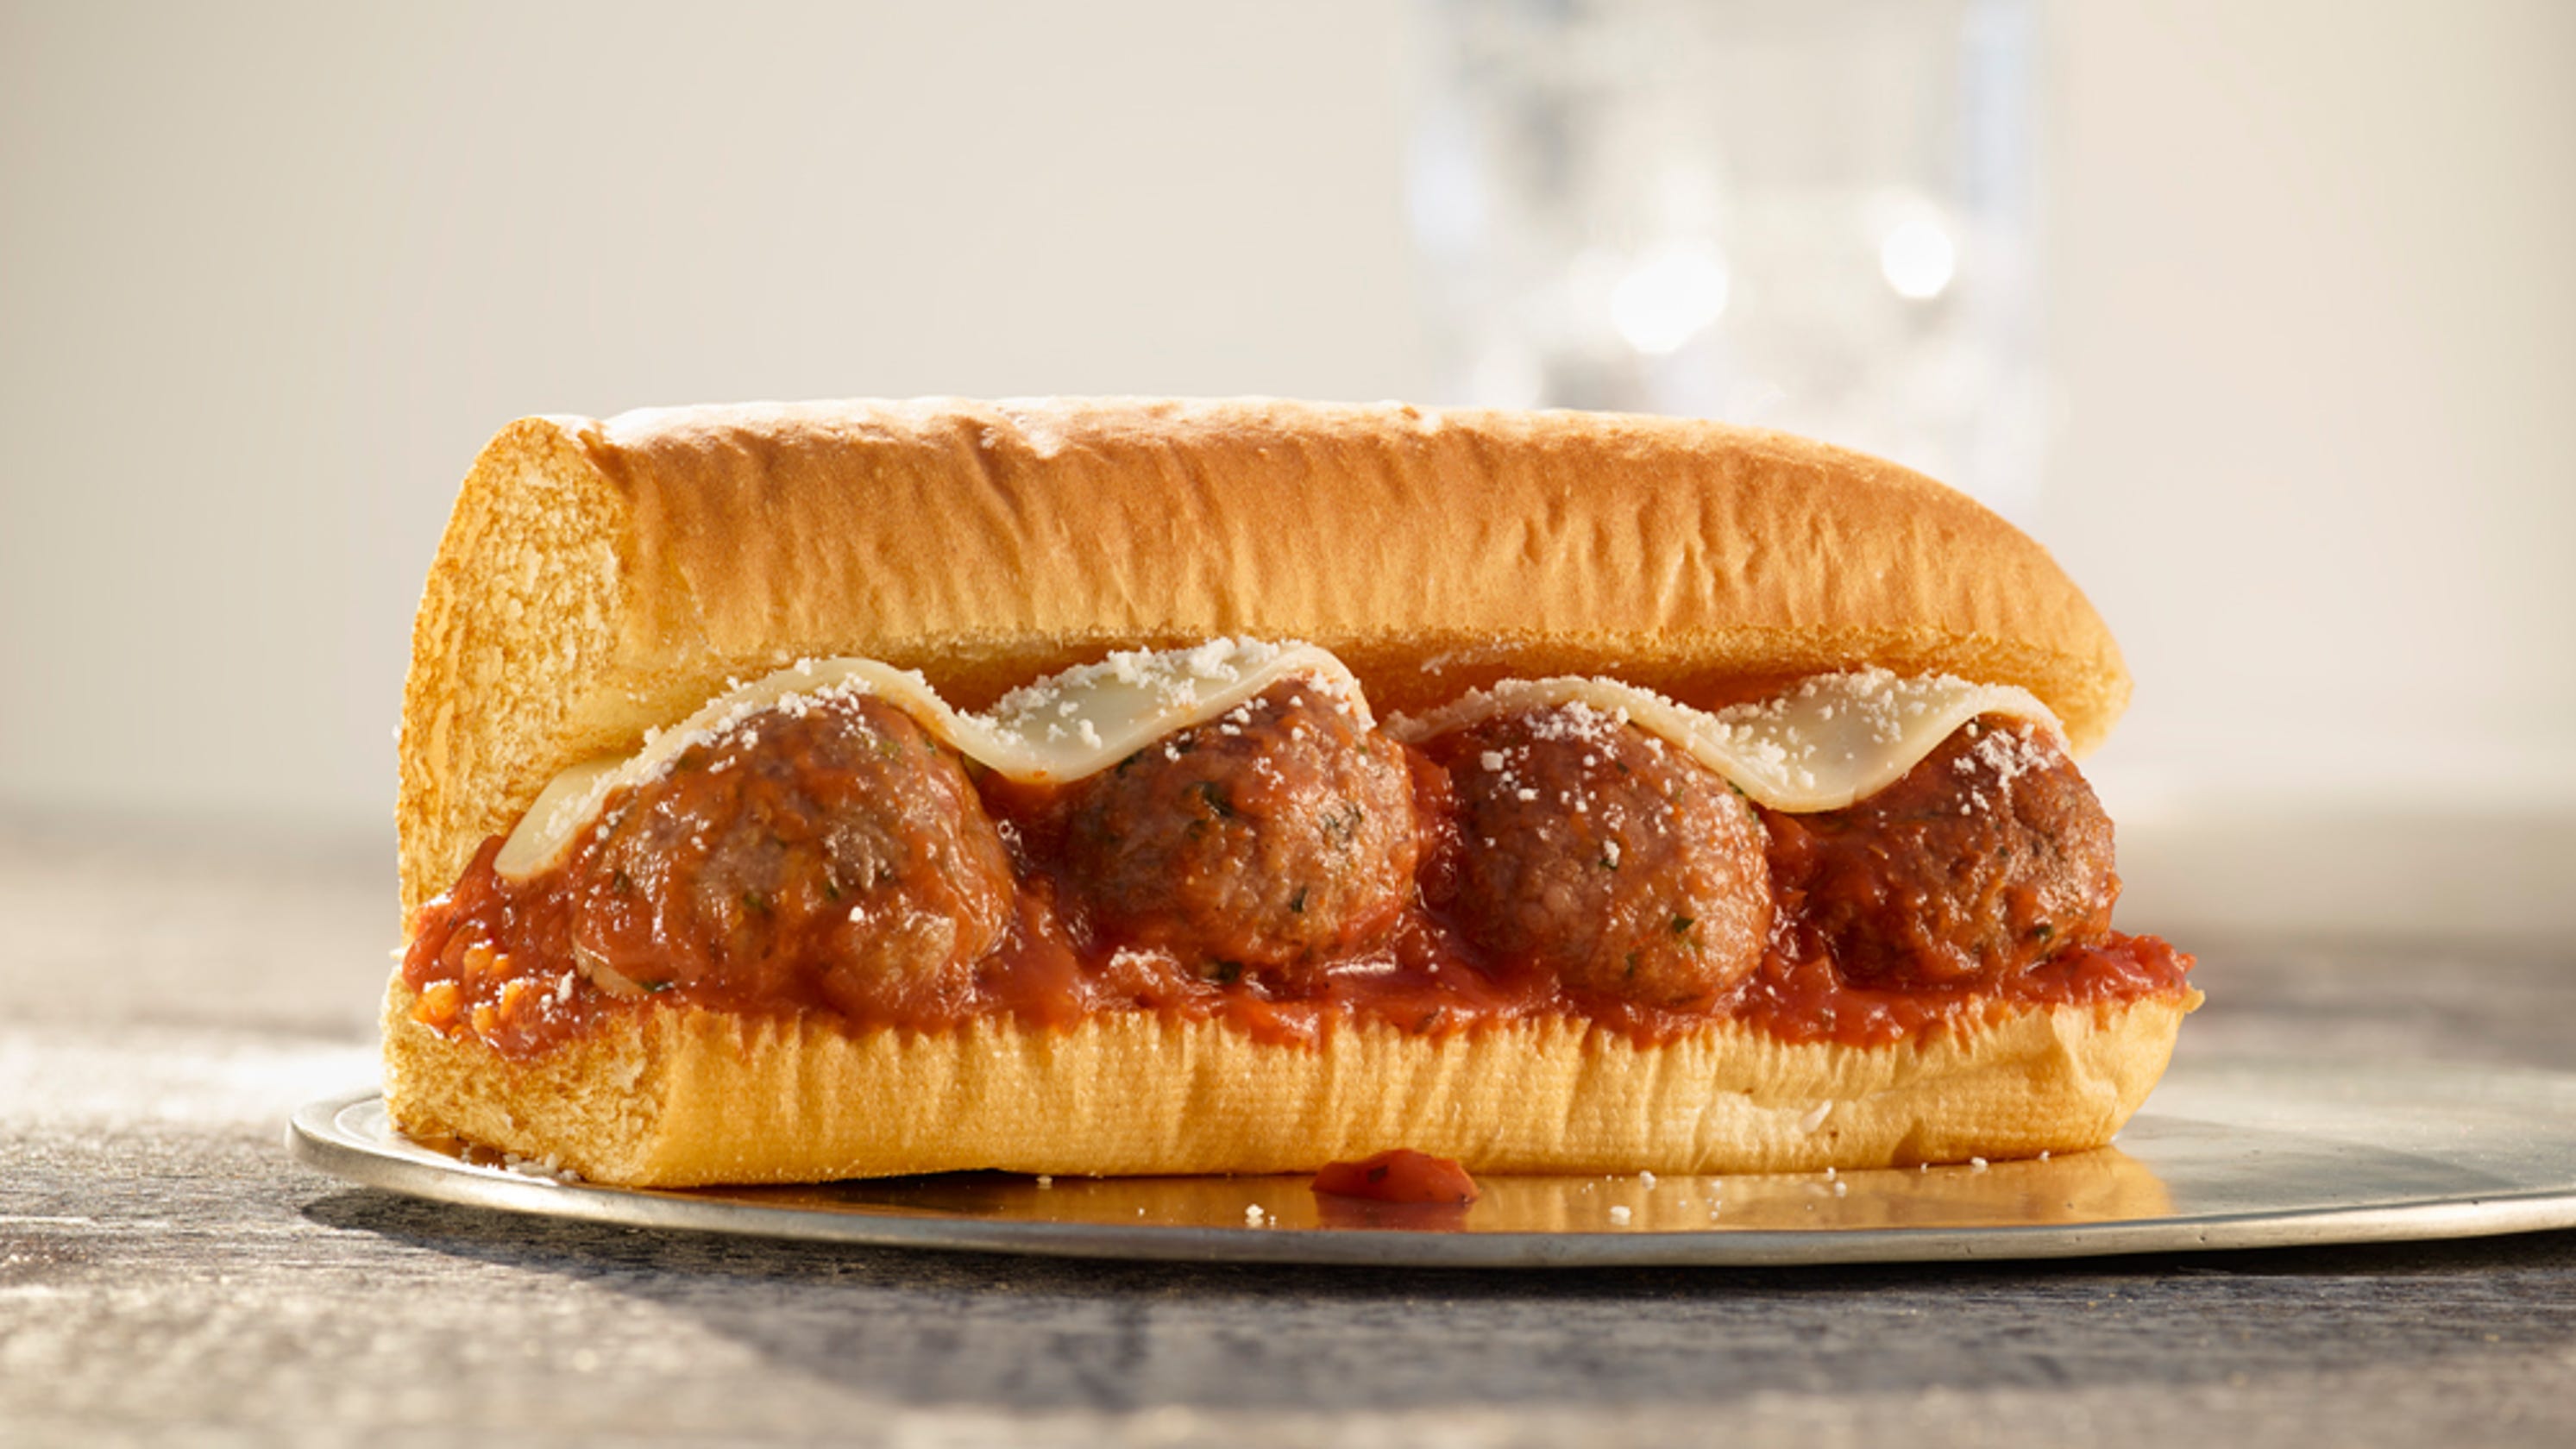 Subway will test plant-based Beyond Meatball Marinara sub at select locations